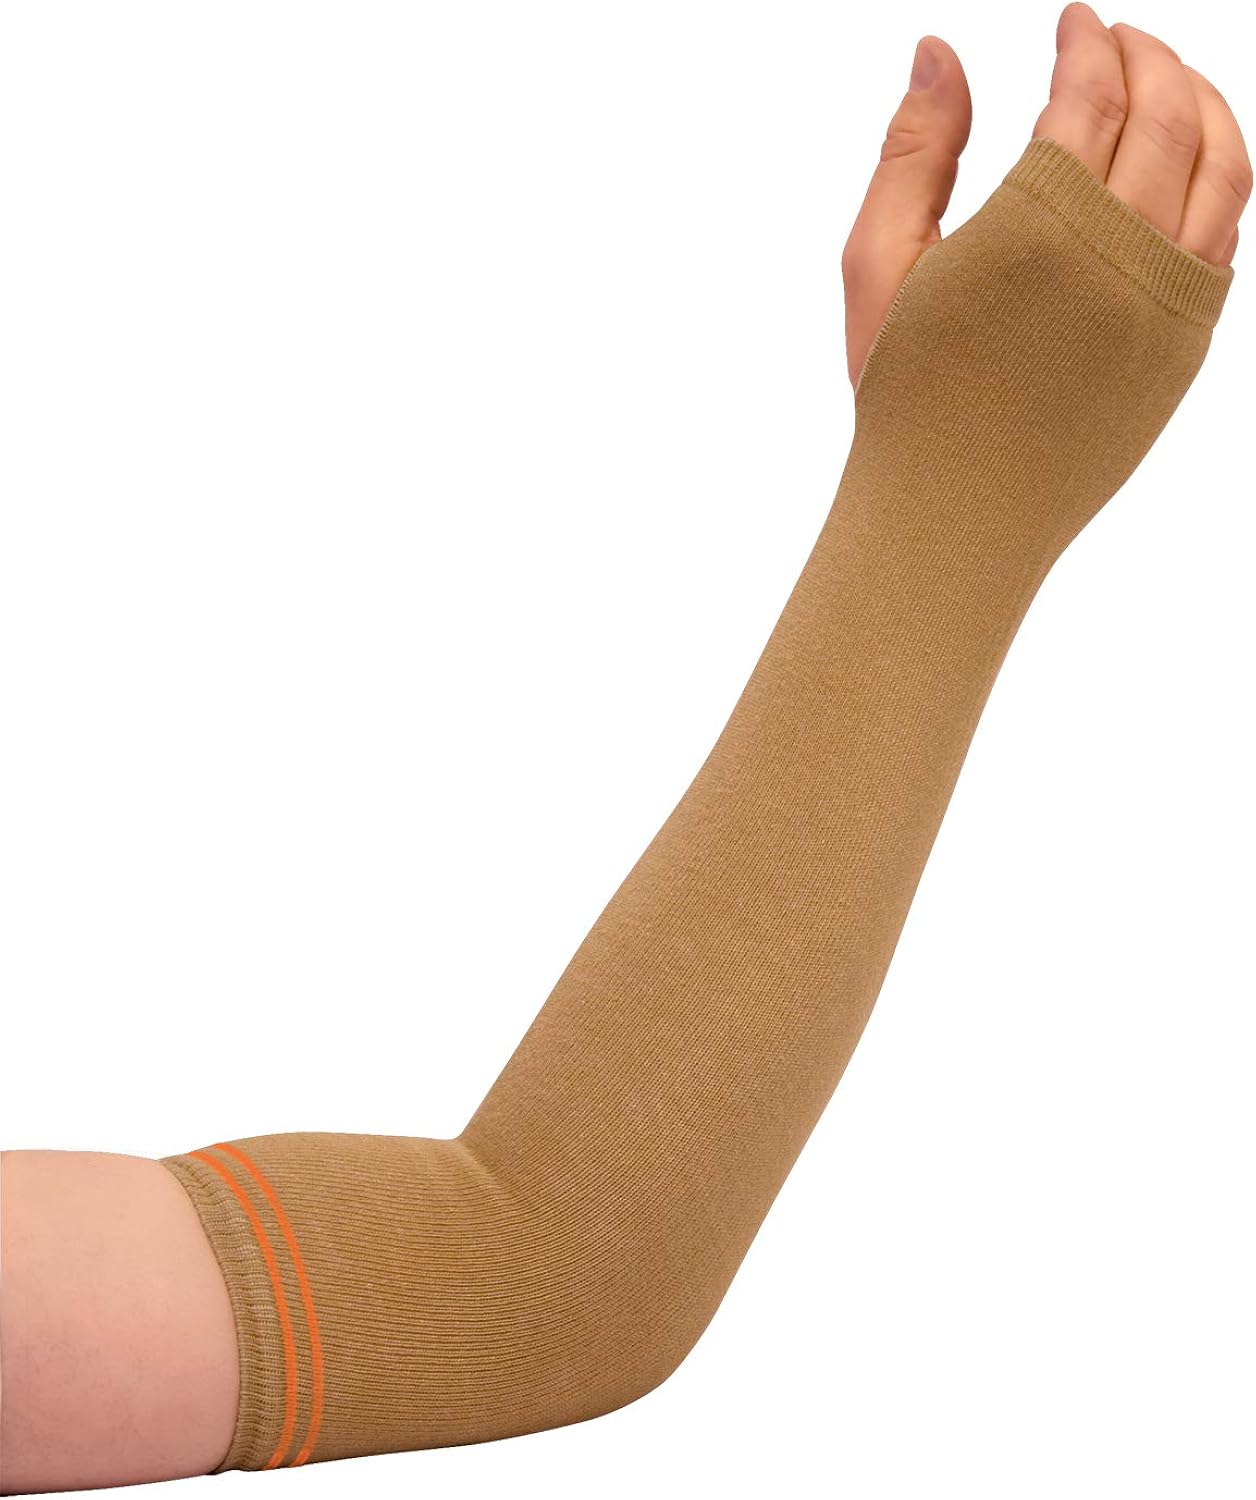 NYOrtho Geri-Sleeves Arm Skin Protectors – Pair of and Washable Protects Sensitive Thin Skin from Tears & Abrasions